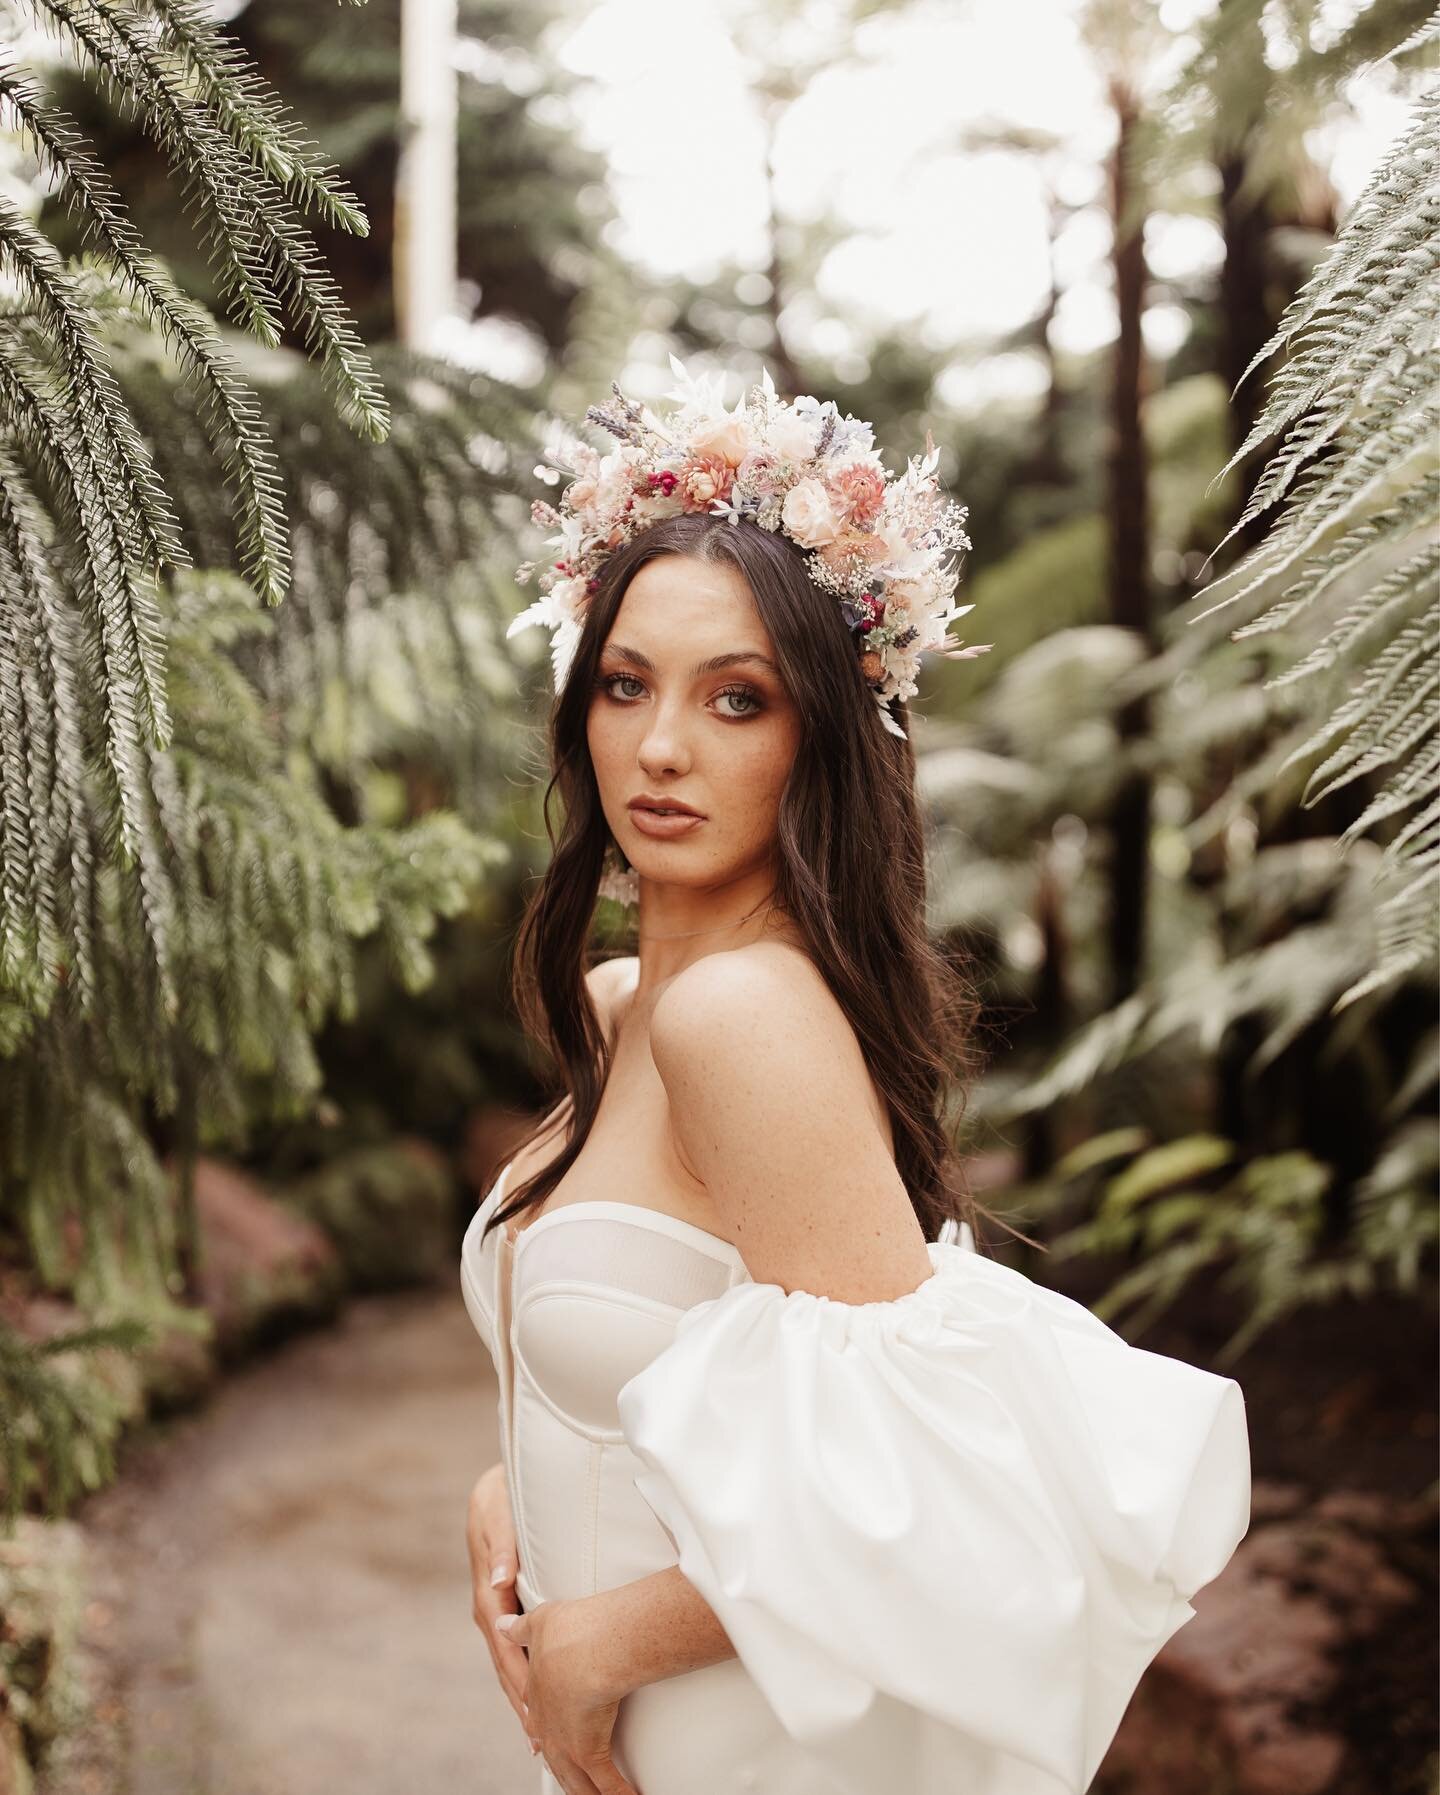 Whilst in Glasgow I tagged along with @sophiealexandriaphotography who was taking some snaps for @marciawilkesmakeup 💫 

The botanics were cosy but no where near as 🔥🔥🔥 as this look 👌

The squad who put this together:
@sophiealexandriaphotograph